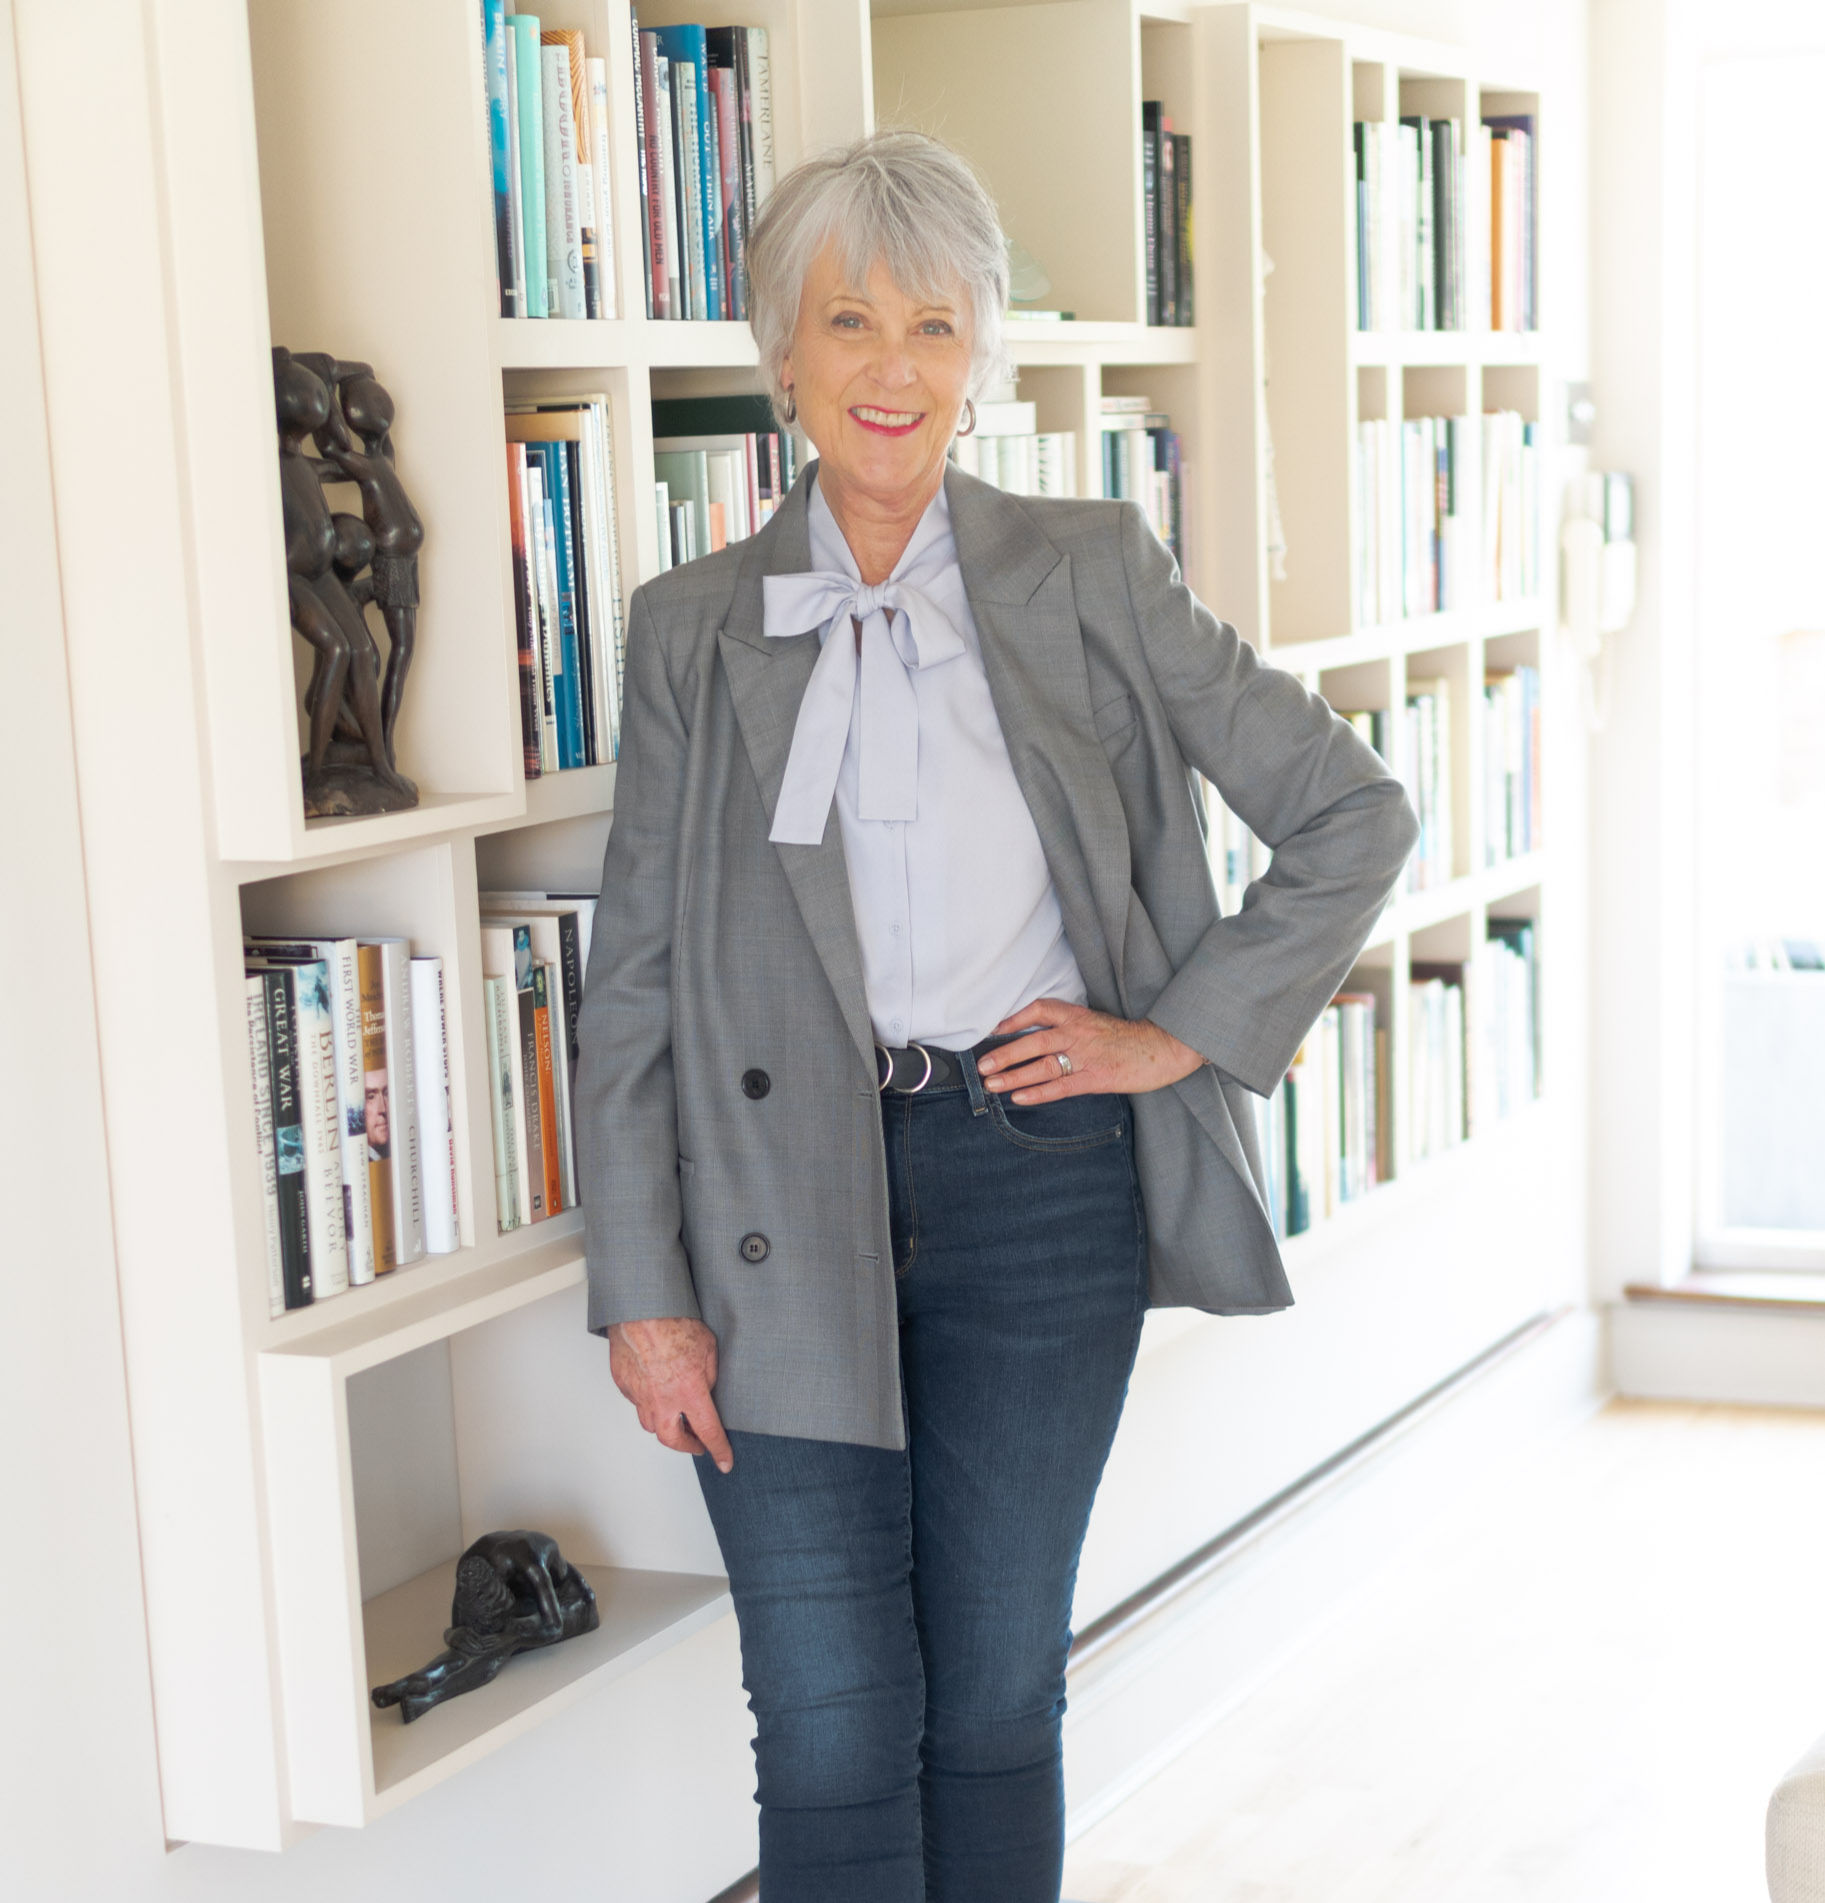 How to wear classic jeans four ways - Chic at any age